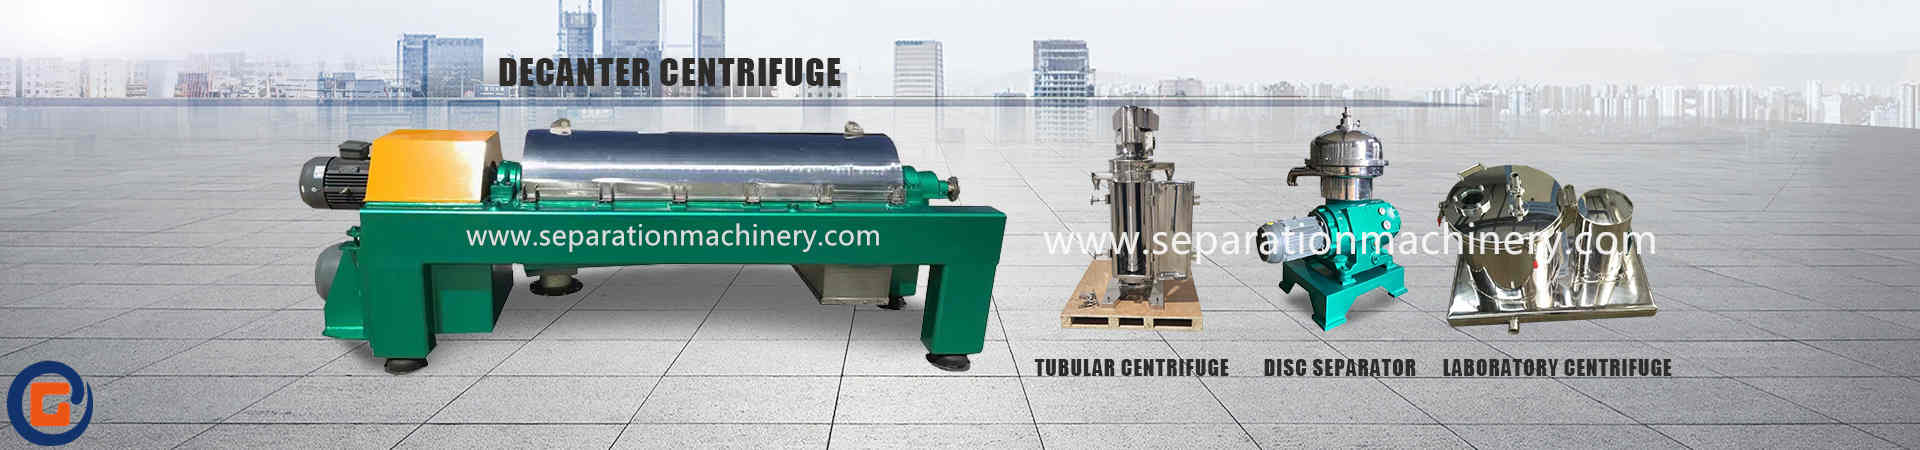 GF125 Tubular Centrifuge Used To Separate Proteins And Blood Cells From Animal Blood